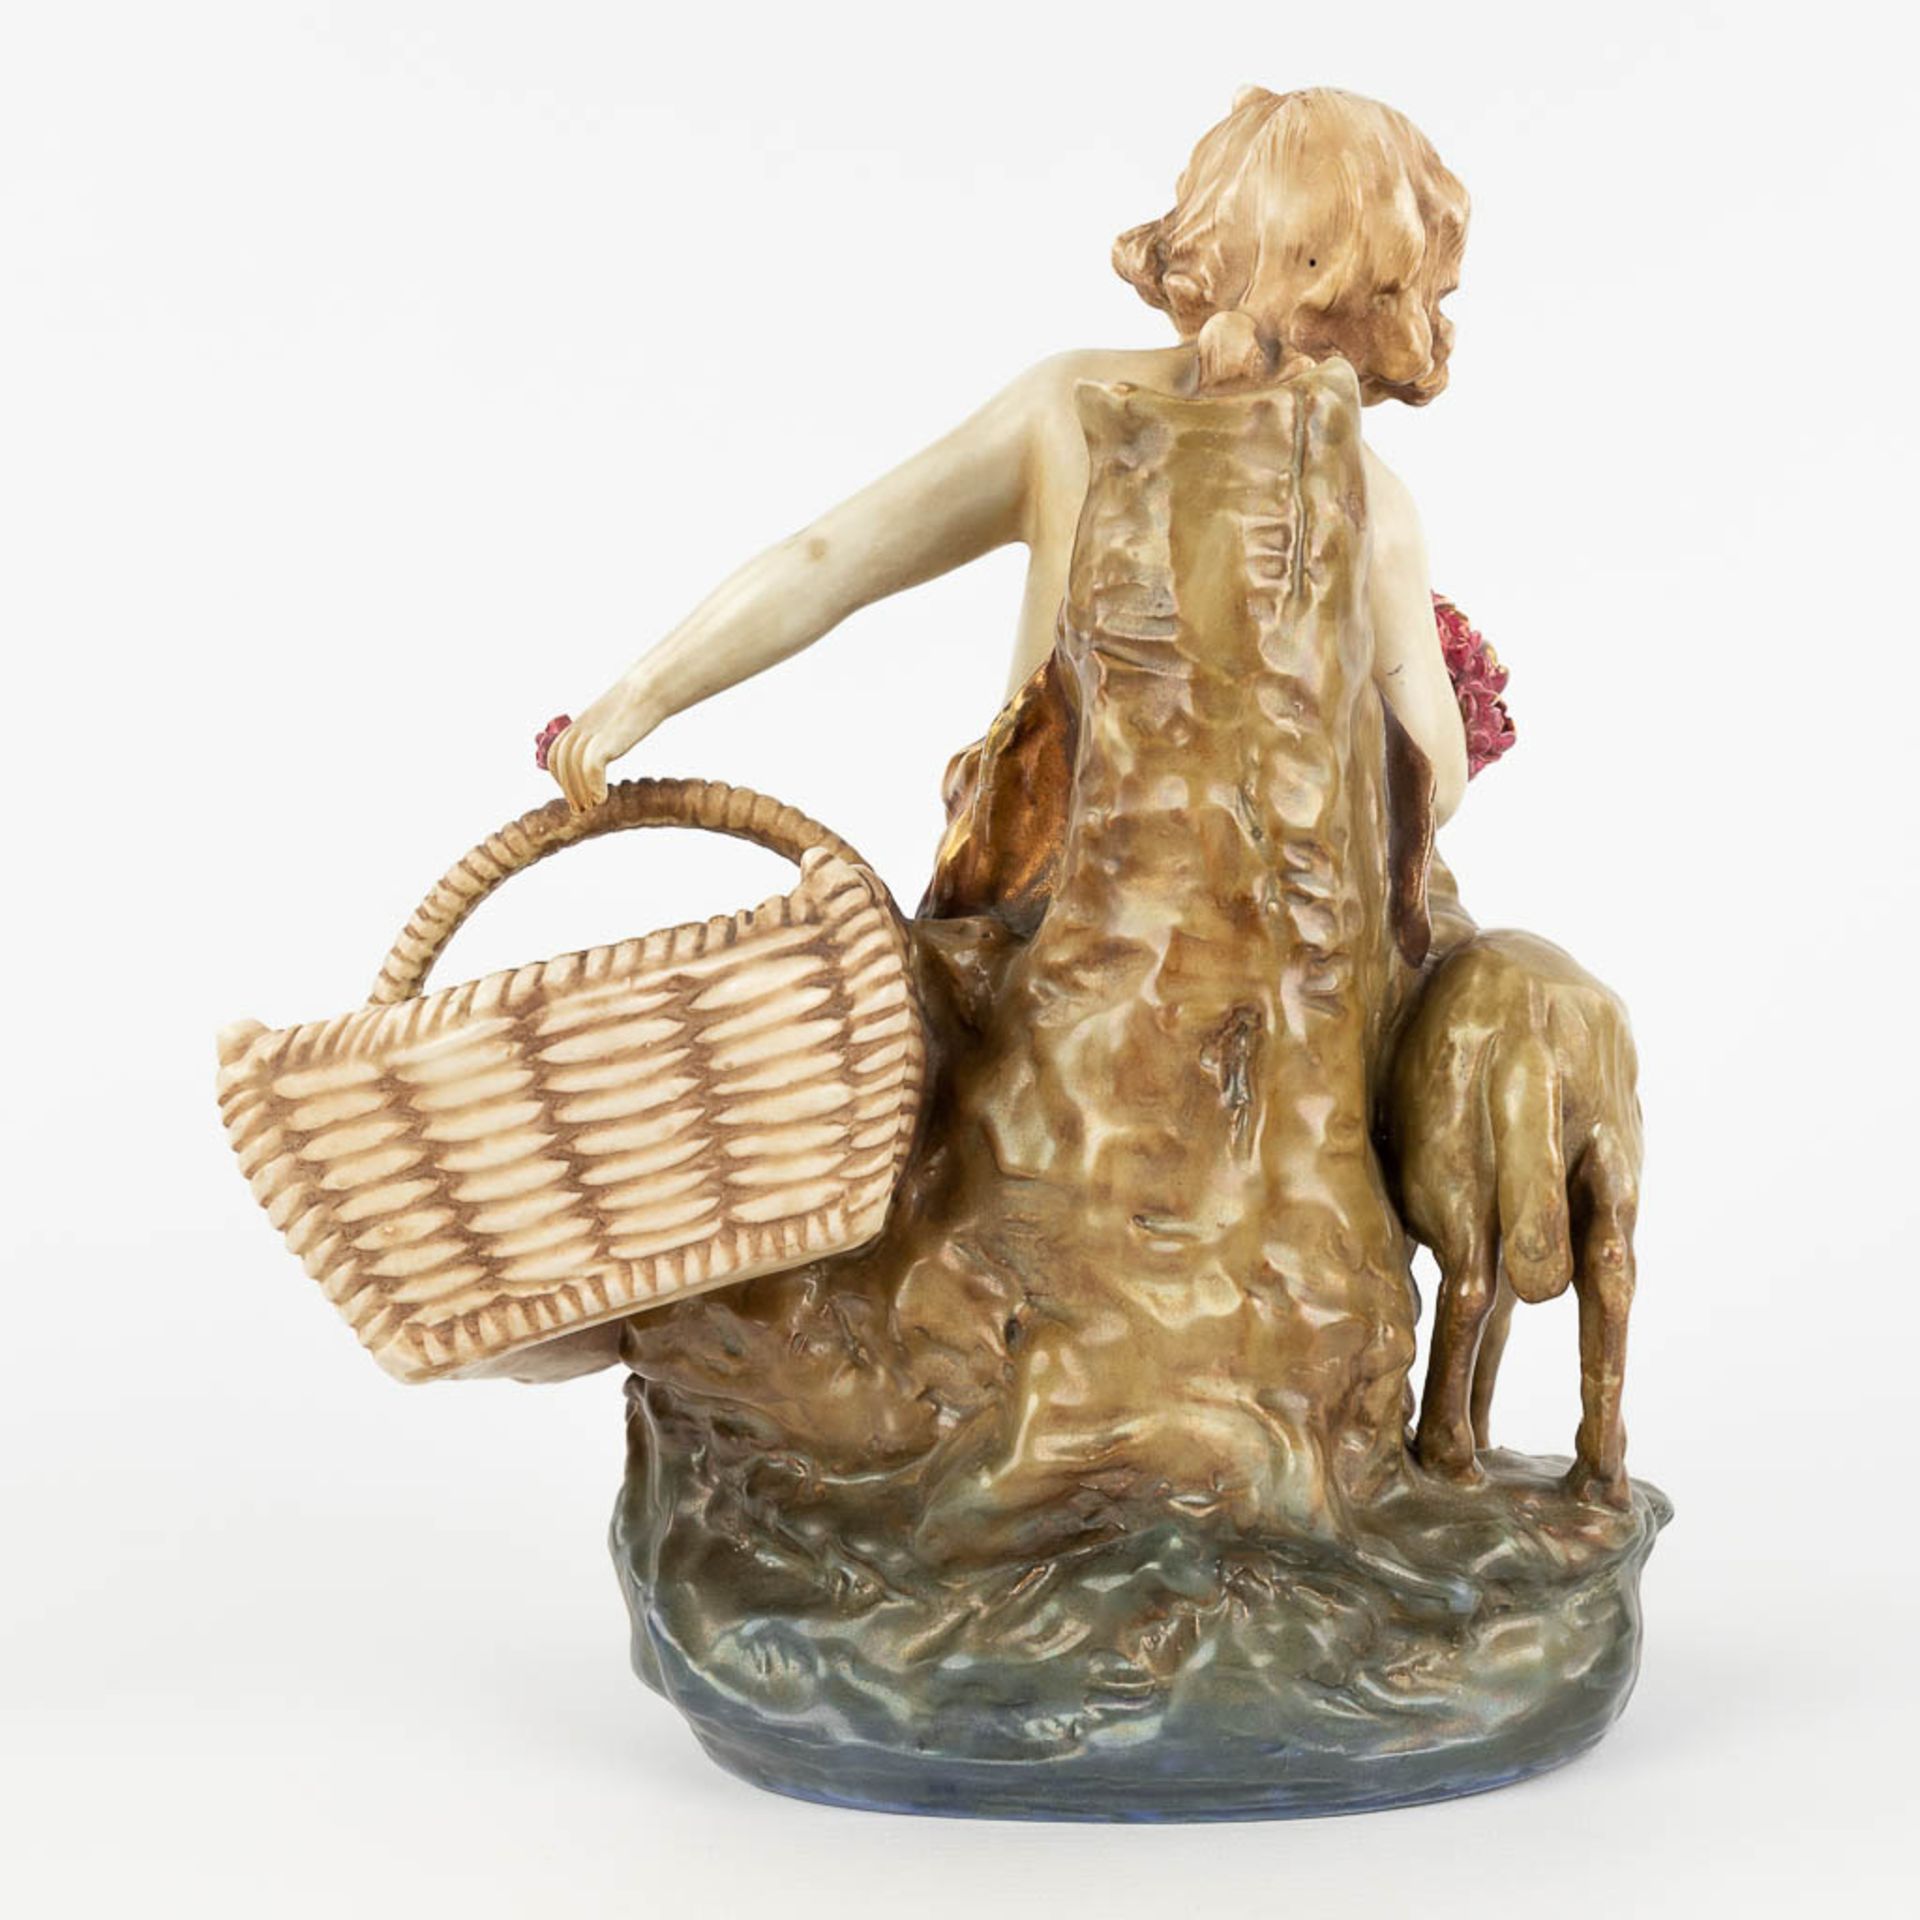 Amphora Austria, 'Child with a basket and sheep' made of glazed faience. (L: 18 x W: 24 x H: 29,5 cm - Image 5 of 14